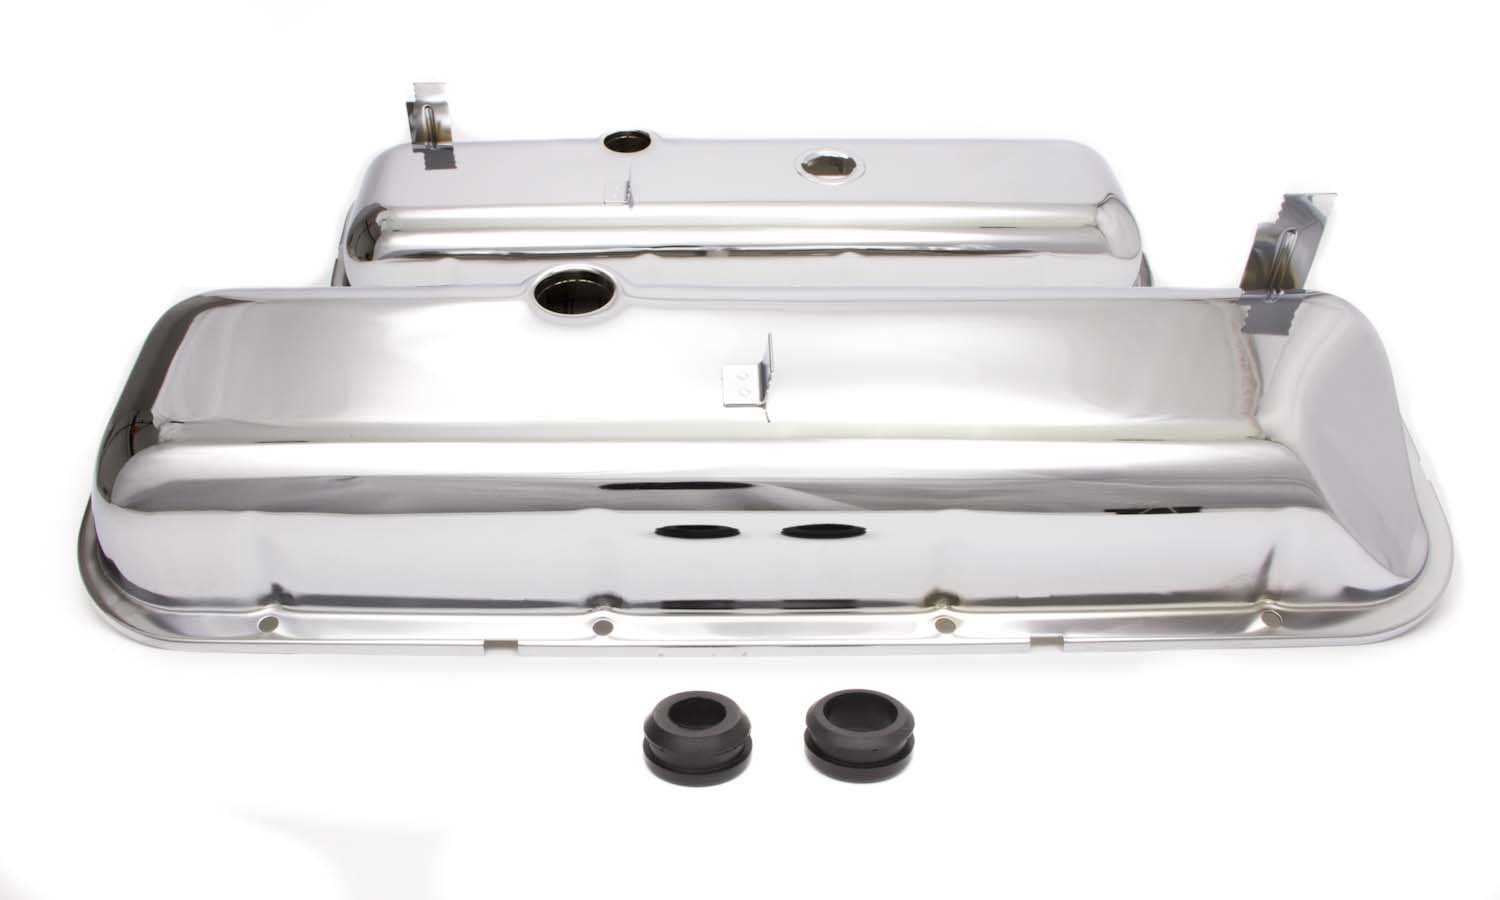 Racing Power Company R9504 Valve Cover, Short, 2-5/8 in Height, Breather Holes, Recessed Corner, Steel, Chrome, Big Block Chevy, Pair